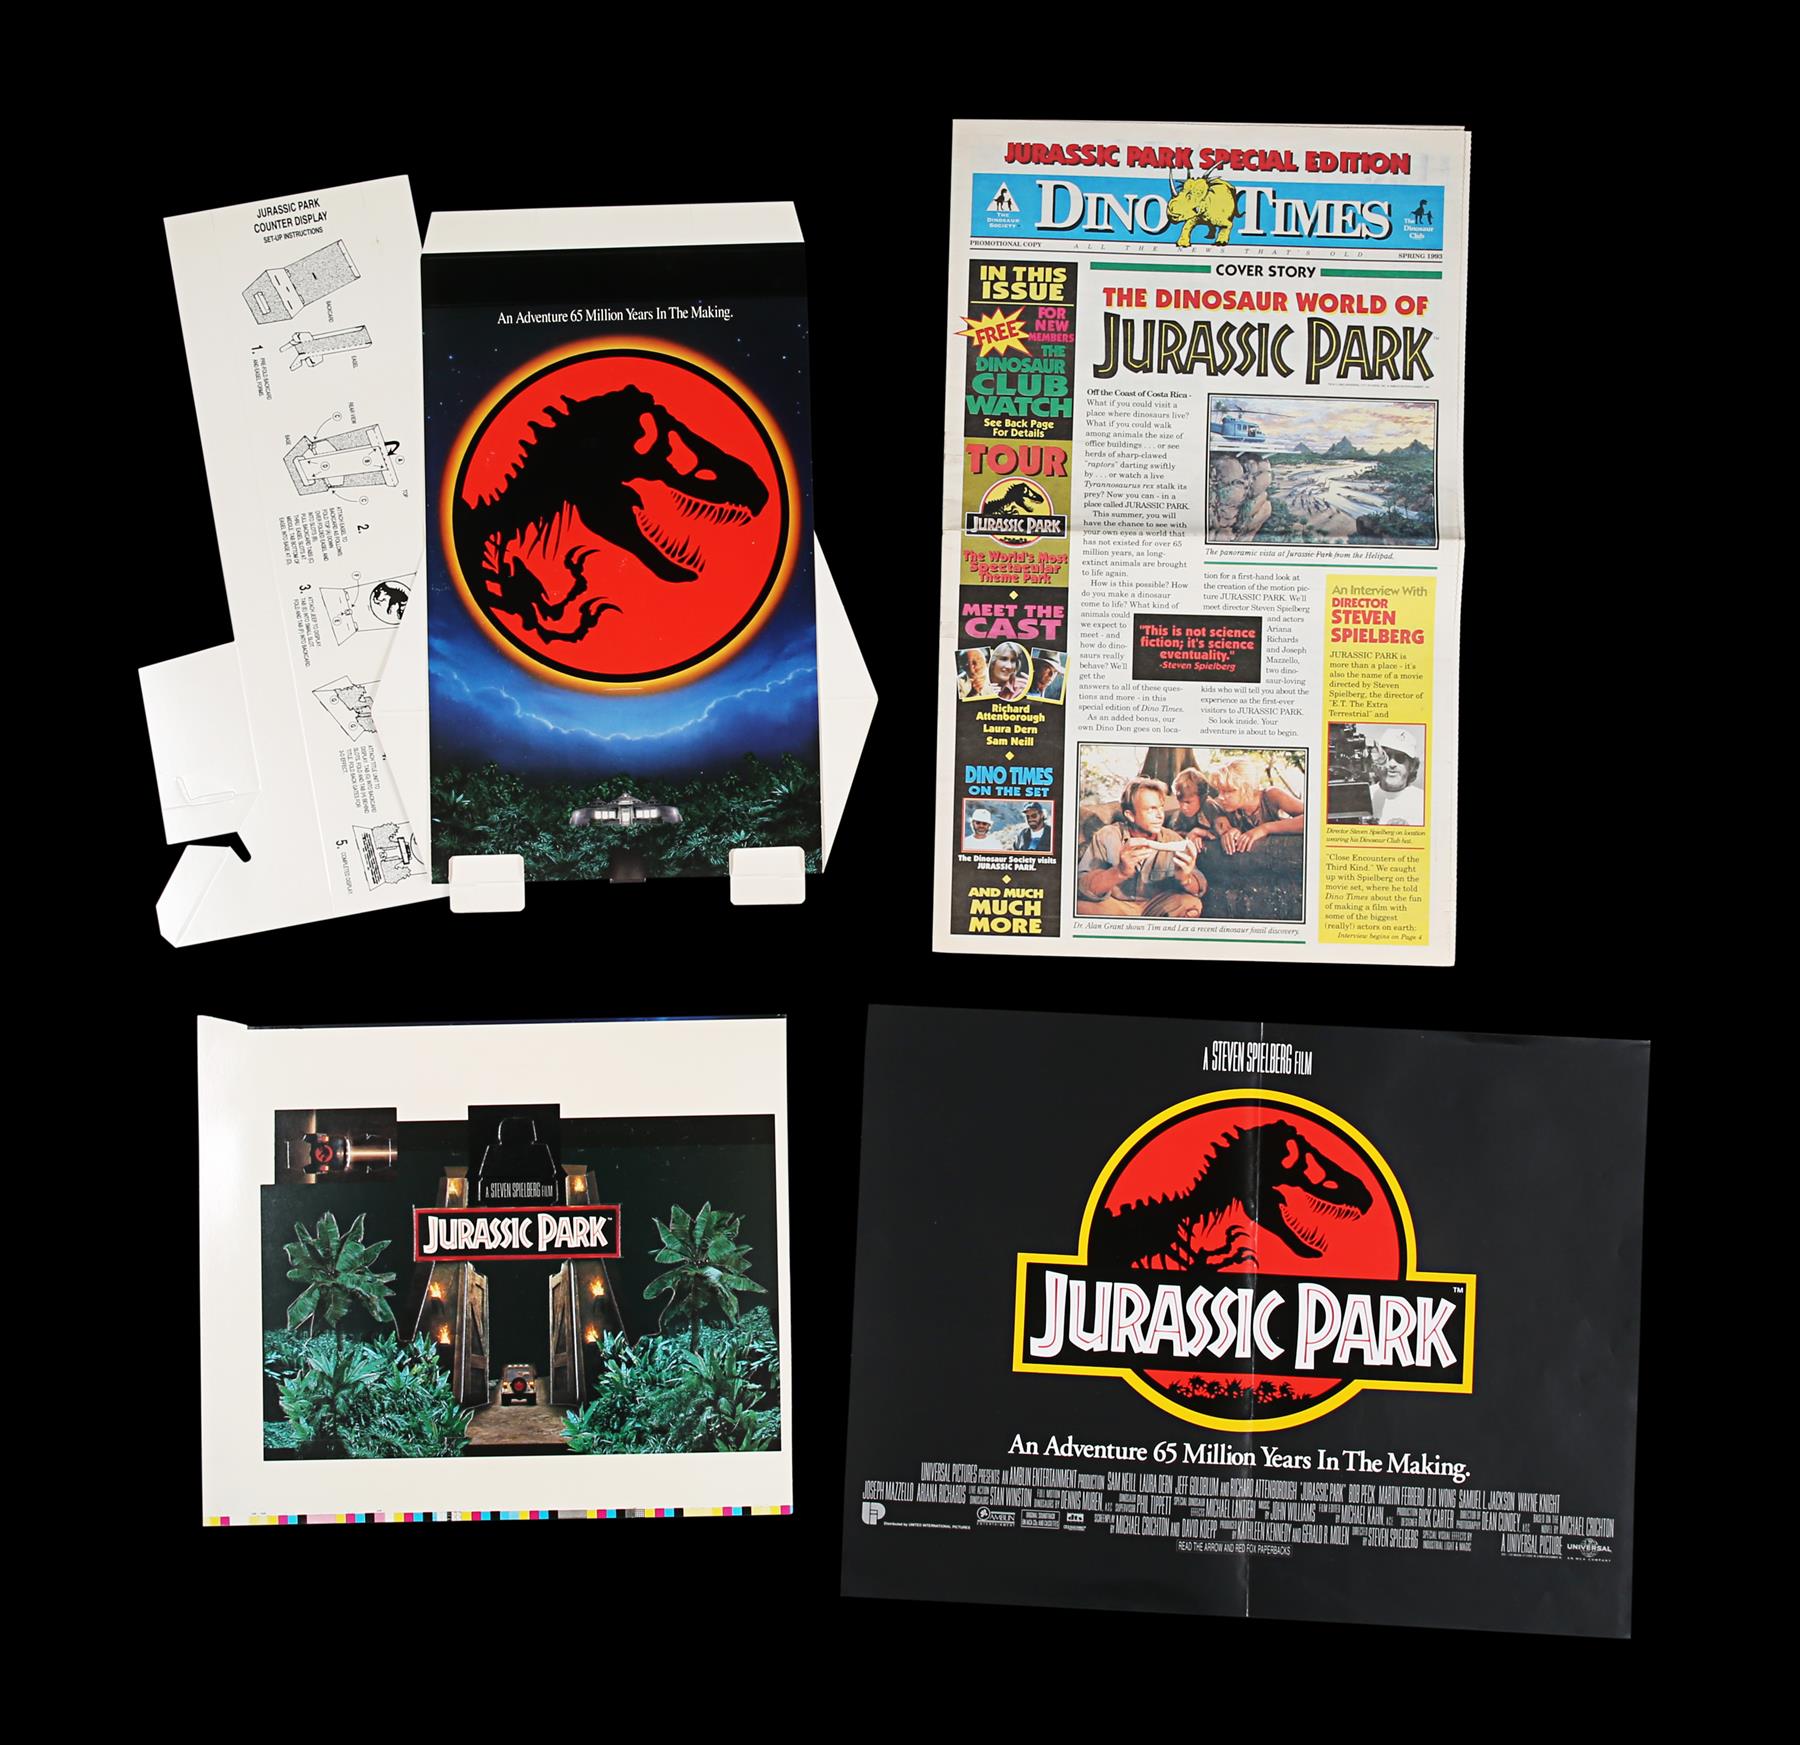 JURASSIC PARK (1993) - Promotional and In-Store Merchandise, 1993